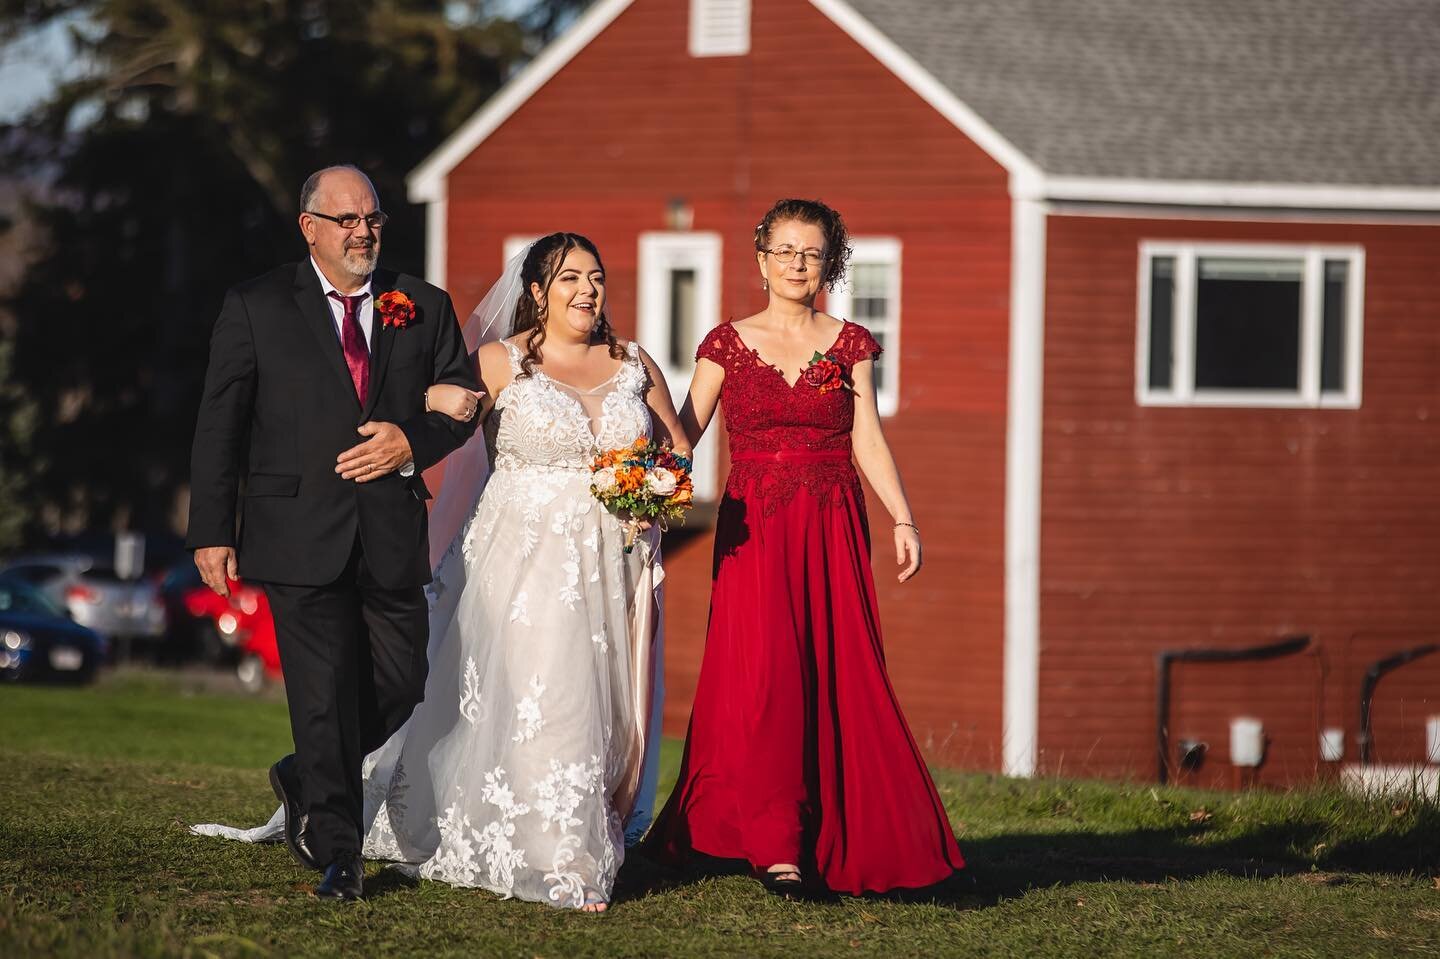 That &ldquo;seeing your bride for the first time&rdquo; feeling. Priceless. 
.
.
.
.
.
.
.
.
.
#shannongisellephotography #shannongiselleweddings #redbarnathampshirecollege #fallwedding #firstlook #downtheaisle